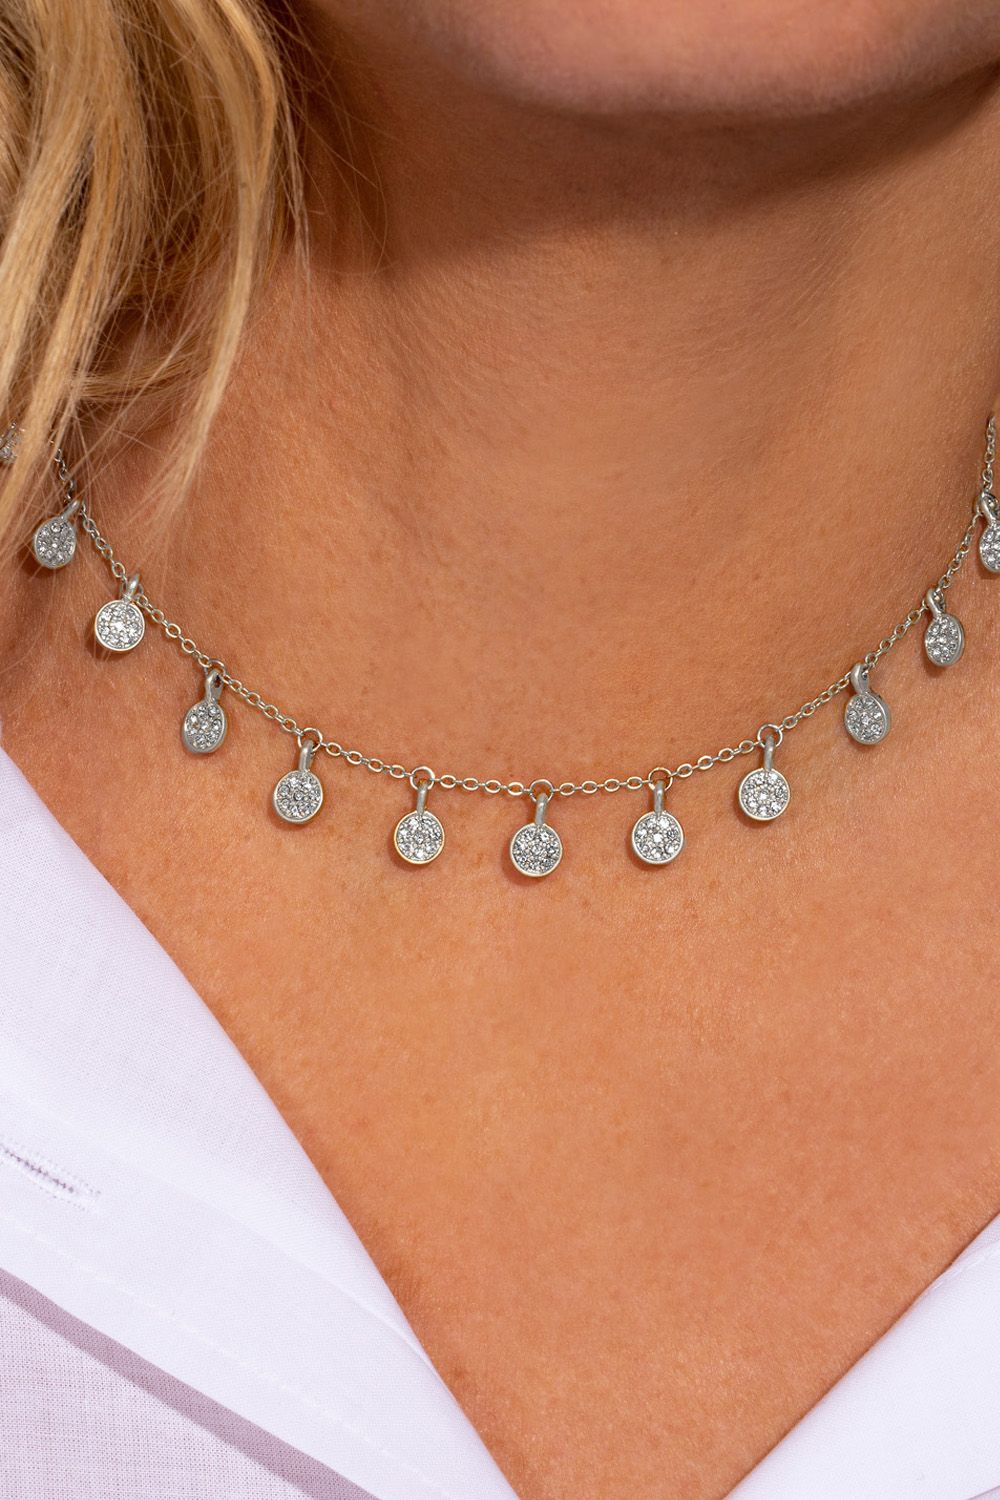 If you love your boho jewellery with a sparkly twist, this choker necklace has your name all over it! It features a dainty silver choker with miniature coins that dance across your neck. The silver plated necklace features pavé detailing with sparkling clear stones and it's perfect for layering with another longer necklace with a low neckline outfit, or over the top of a jumper during the day! It measures 15 inches and comes with a lobster clasp fastening and a 3 inch extender. The Boho pave choker necklace is designed as a laid back piece with a glamorous twist that you can wear with so many looks!
• Necklace measures 15 inches with a 3 inch extender
• Presented in a stylish KTx jewellery pouch